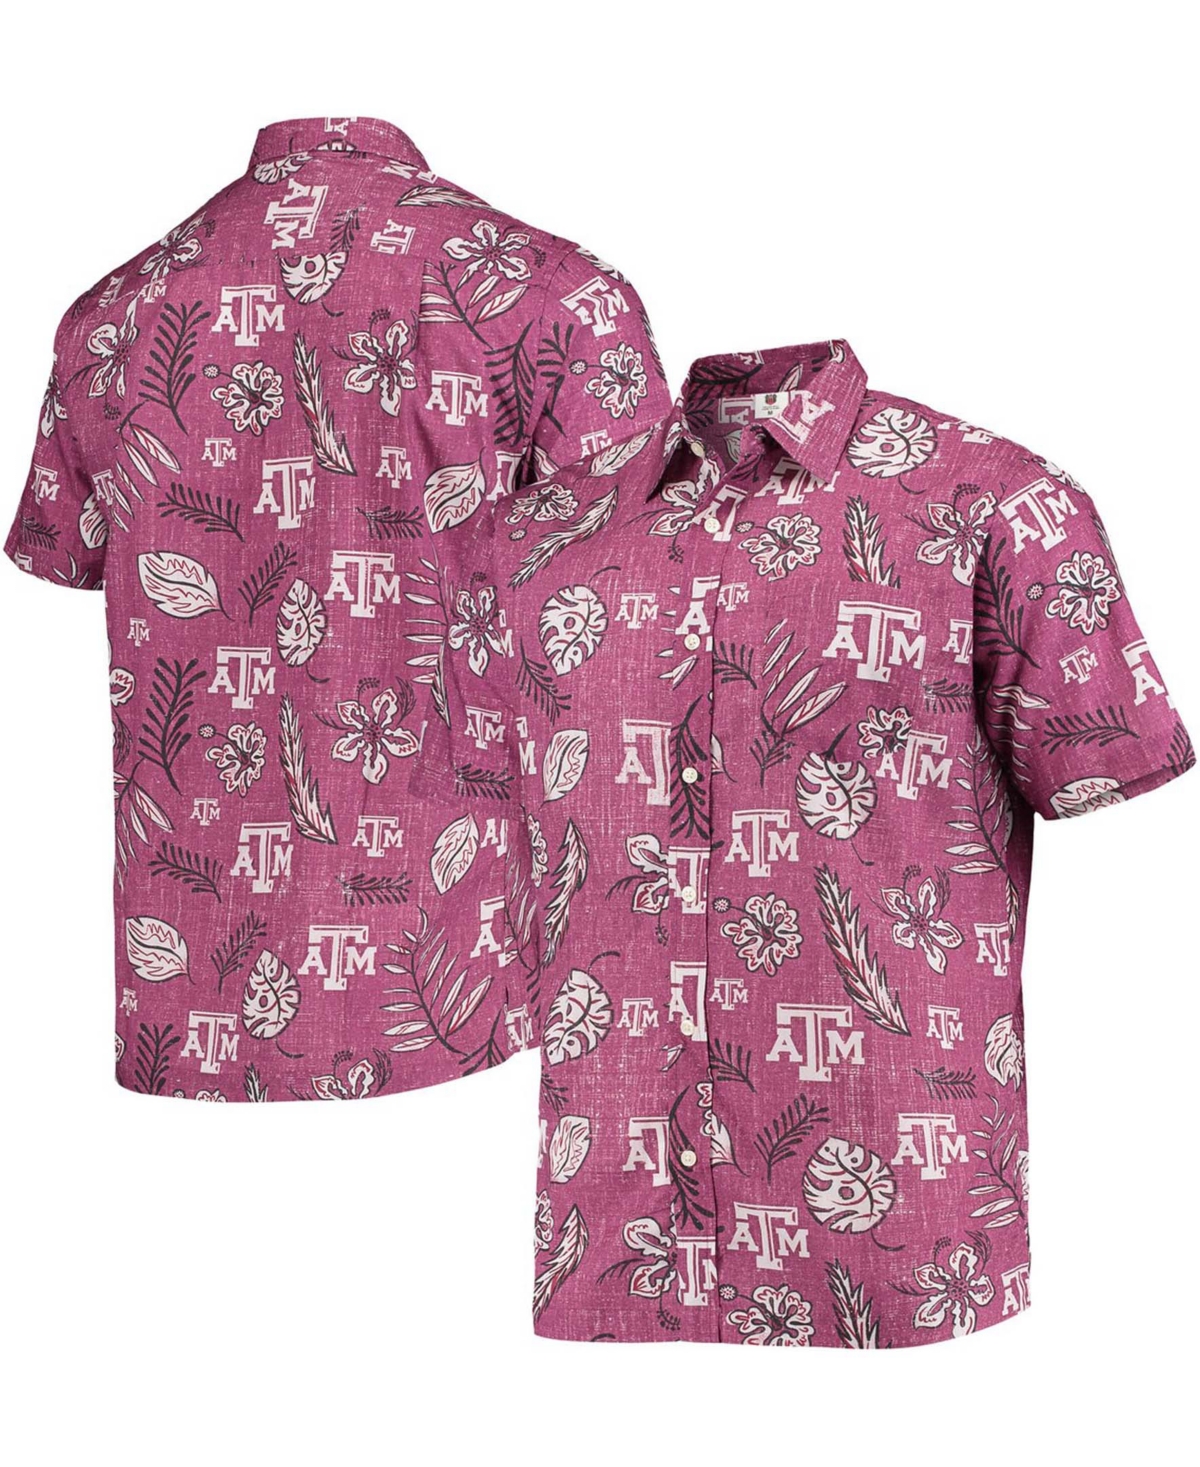 Men's Maroon Texas A M Aggies Vintage-Like Floral Button-Up Shirt - Maroon